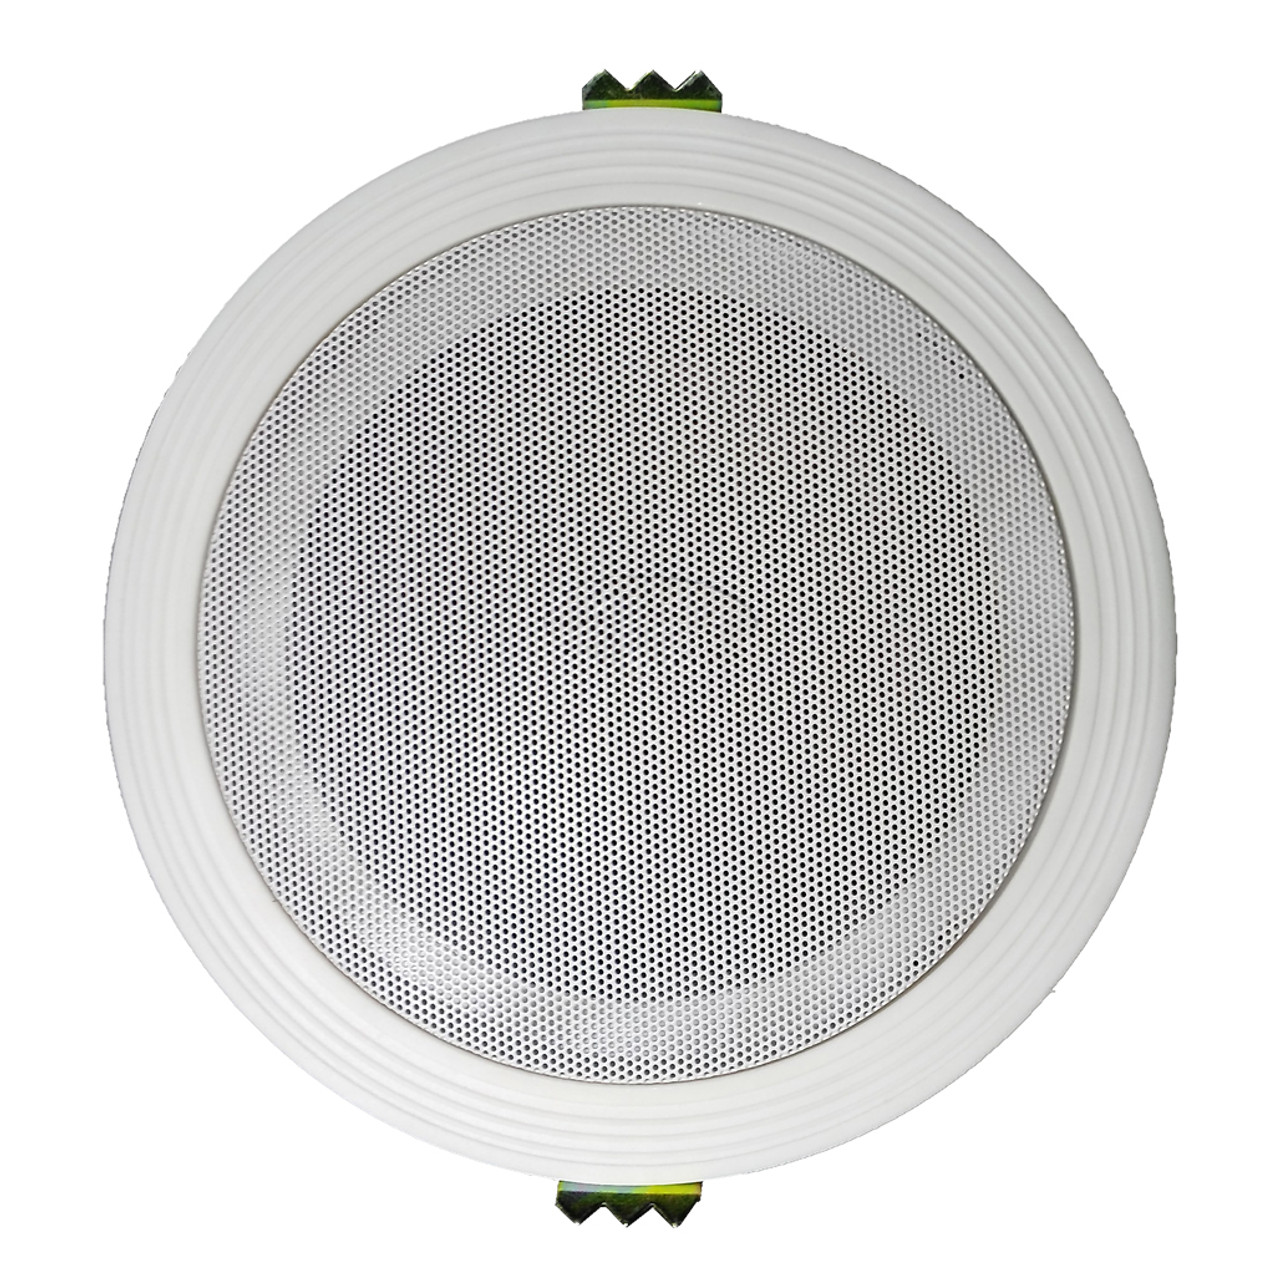 4 inch ABS Ceiling Speaker (A57)